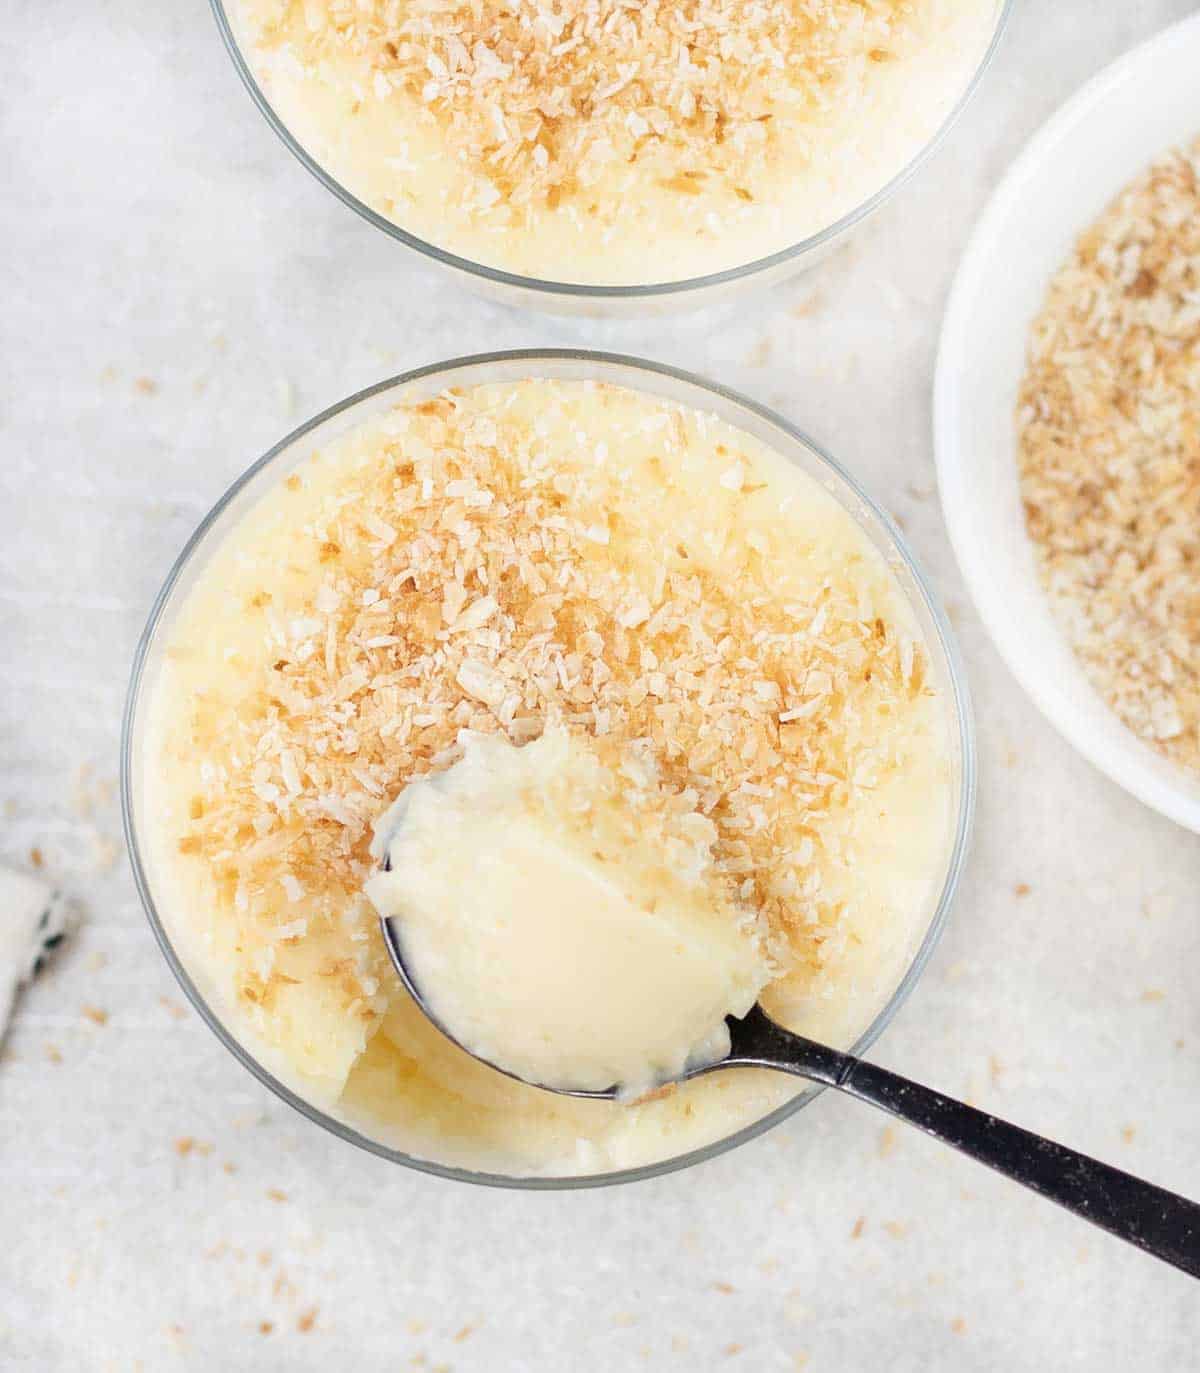 a spoonful of Coconut Milk Pudding.